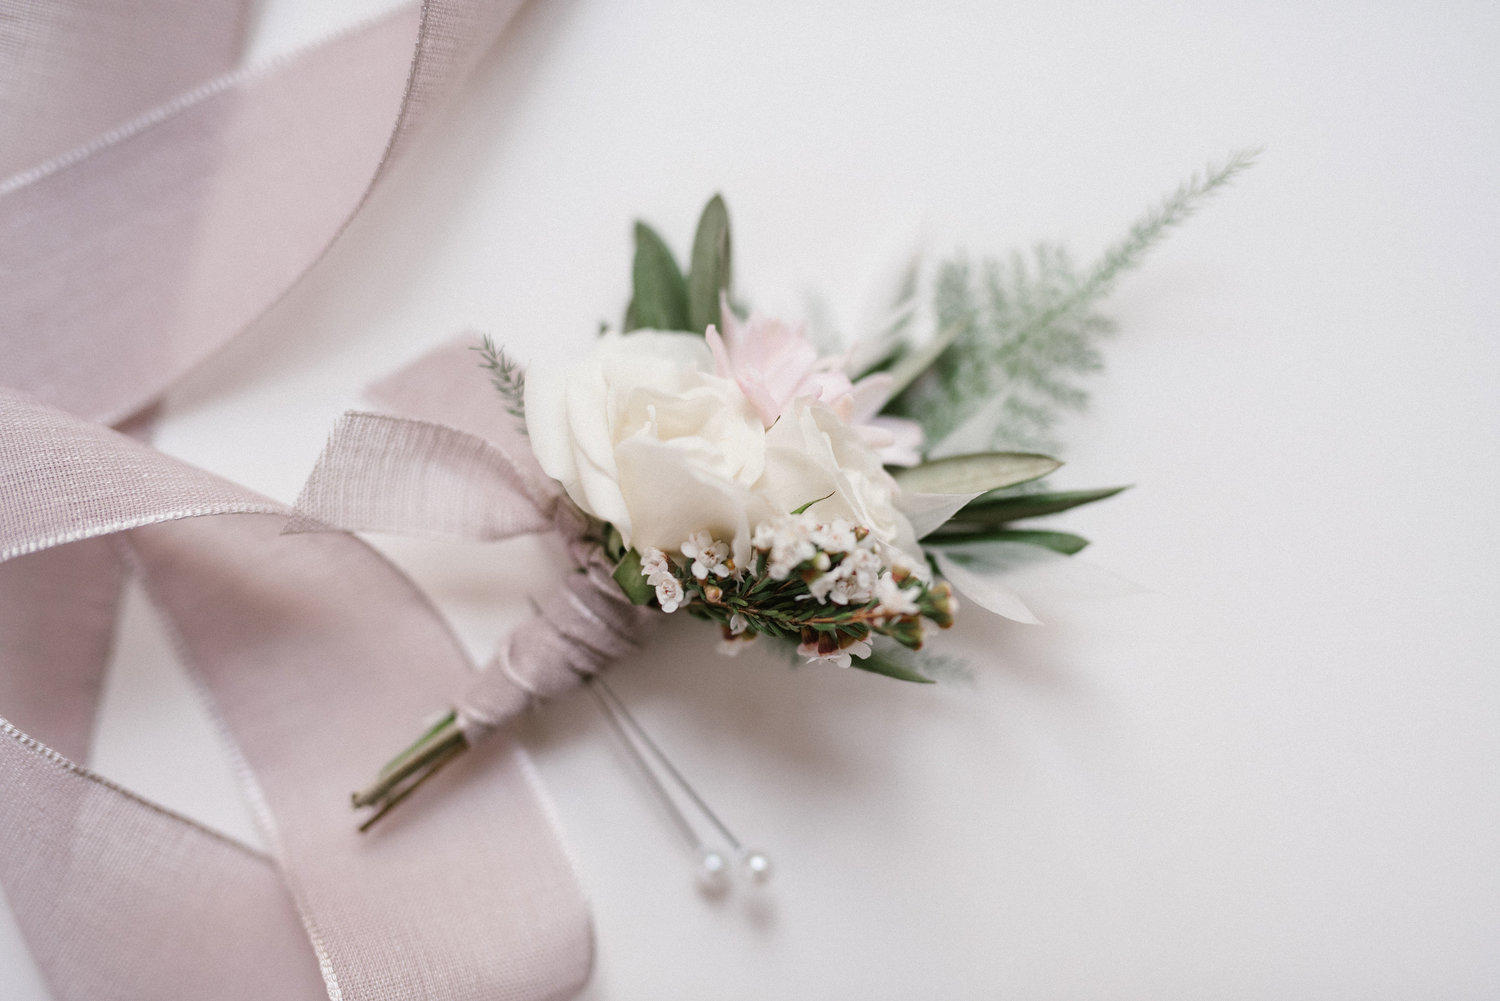 How To Store Boutonniere